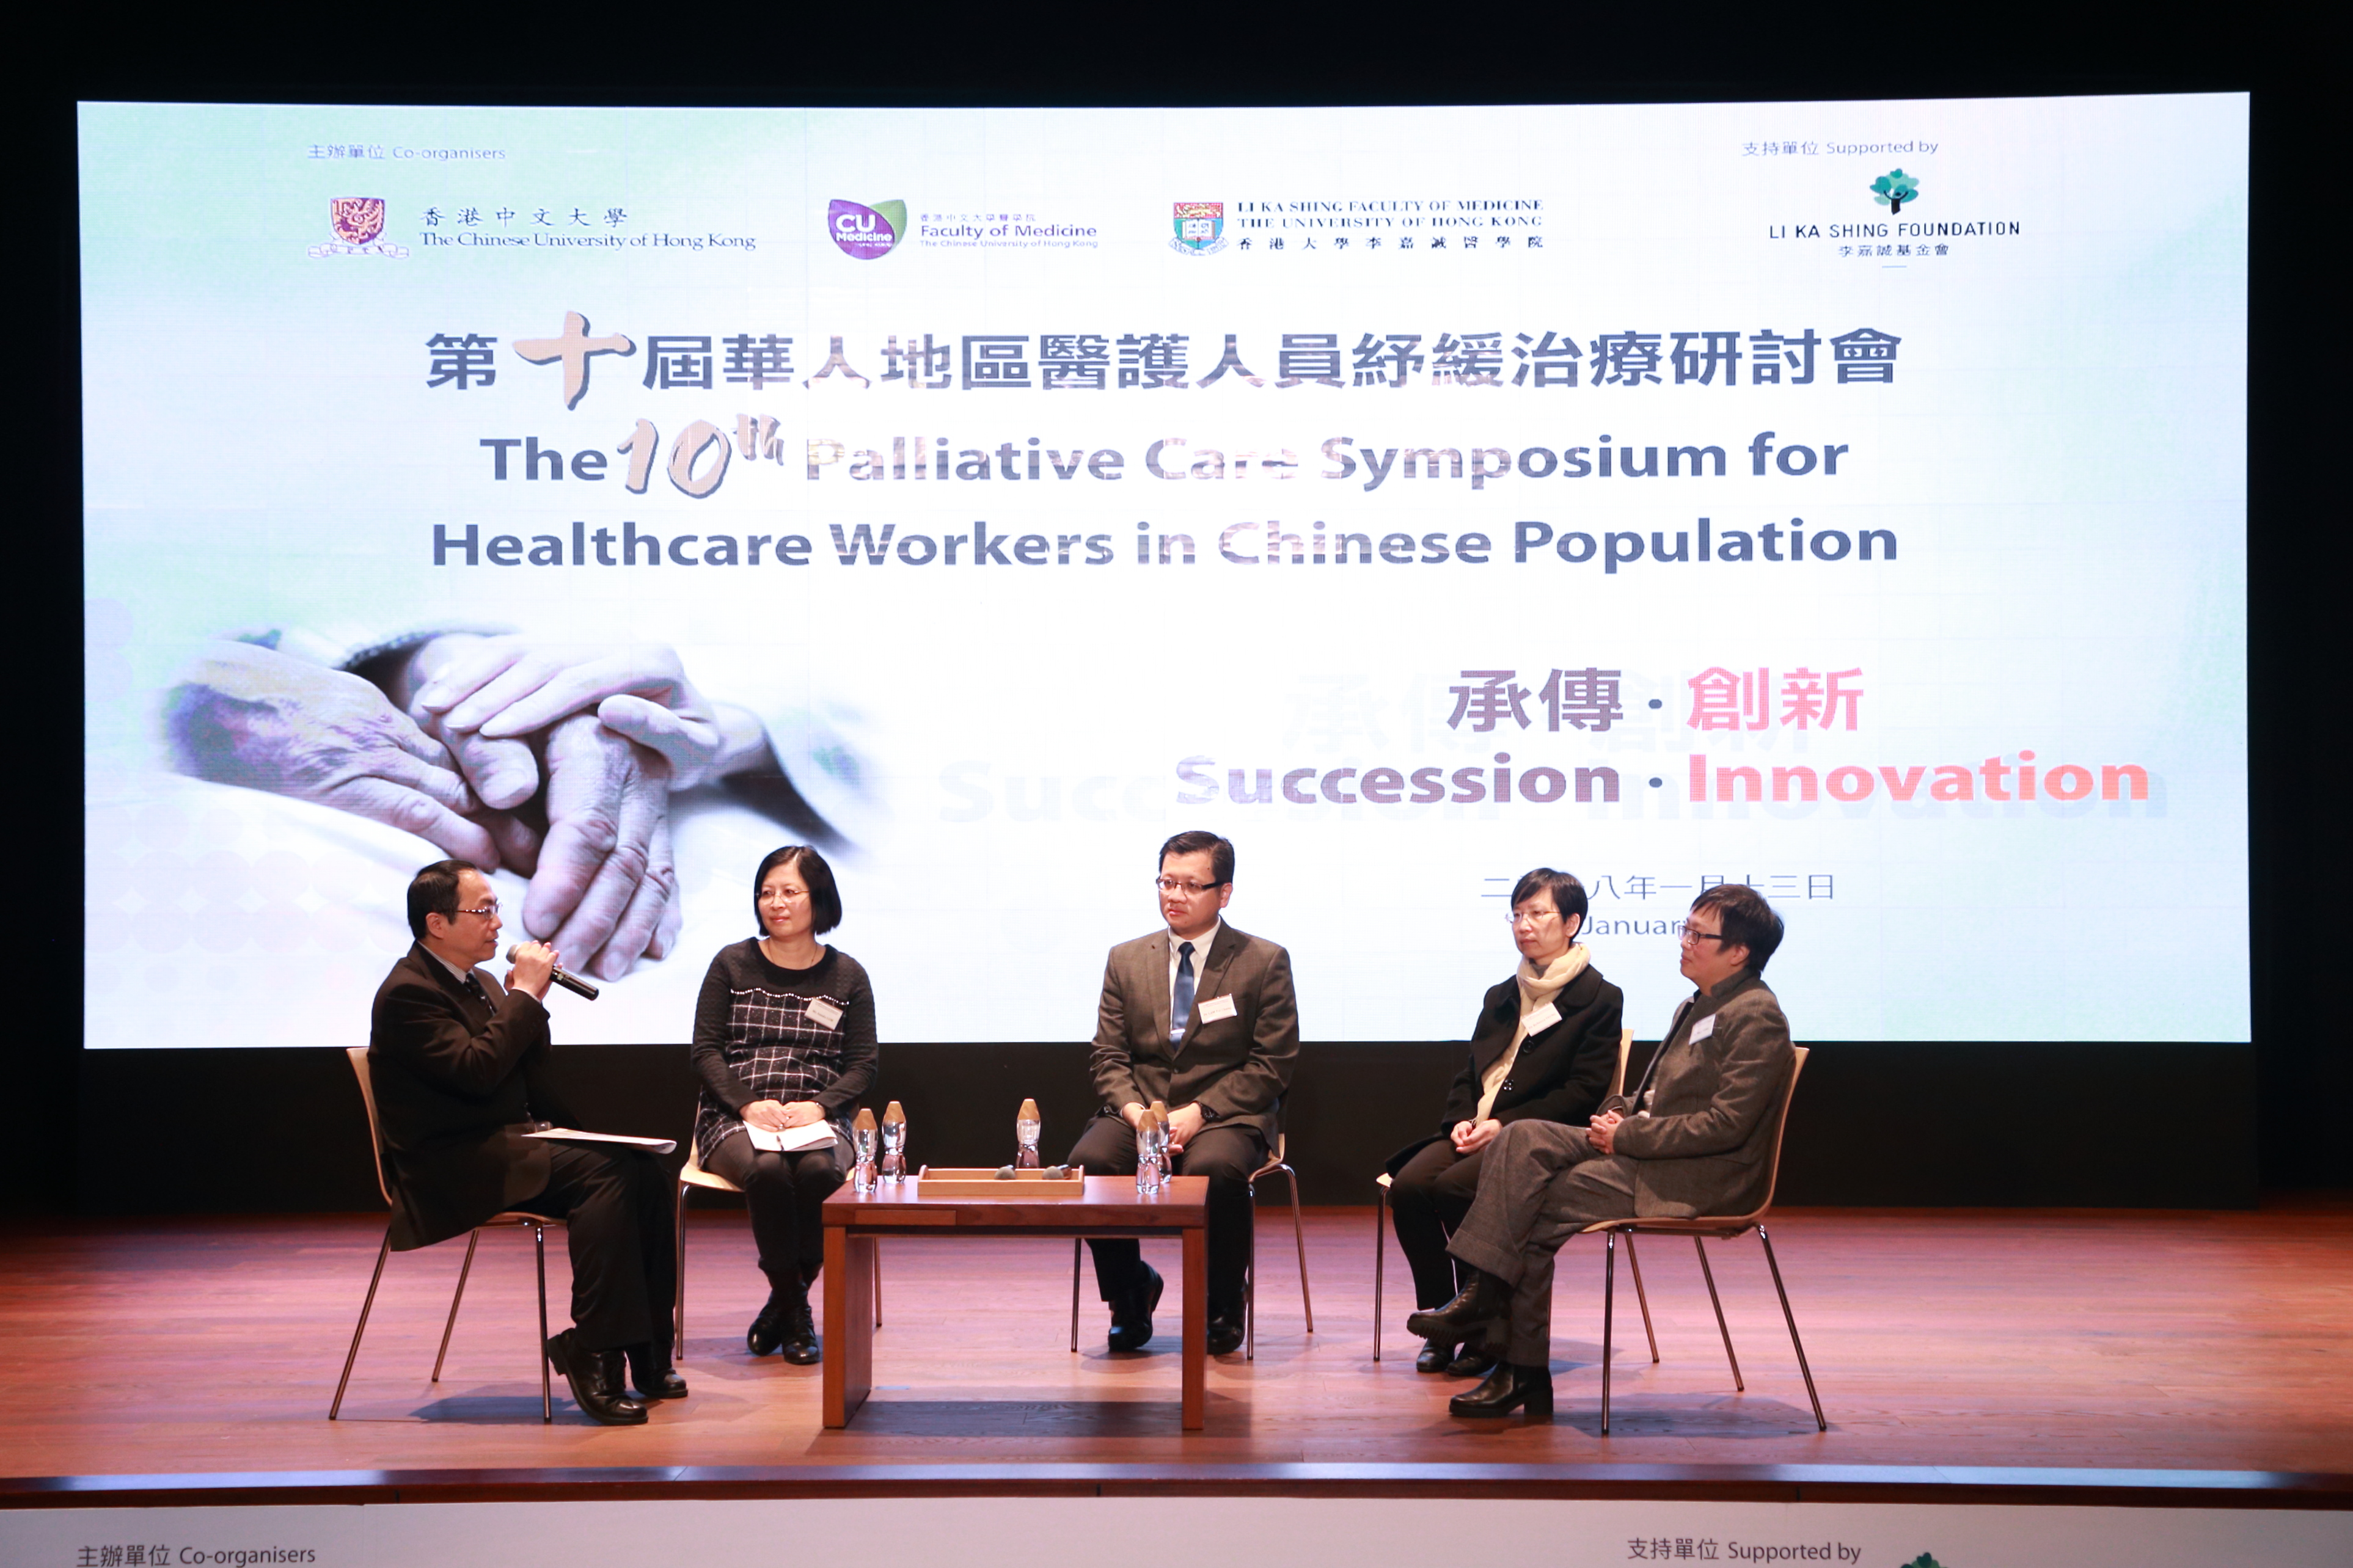 Experts from the healthcare sector exchange views on the ‘Future Development of Oncology Palliative Care Service in Hong Kong’ at the panel discussion. 